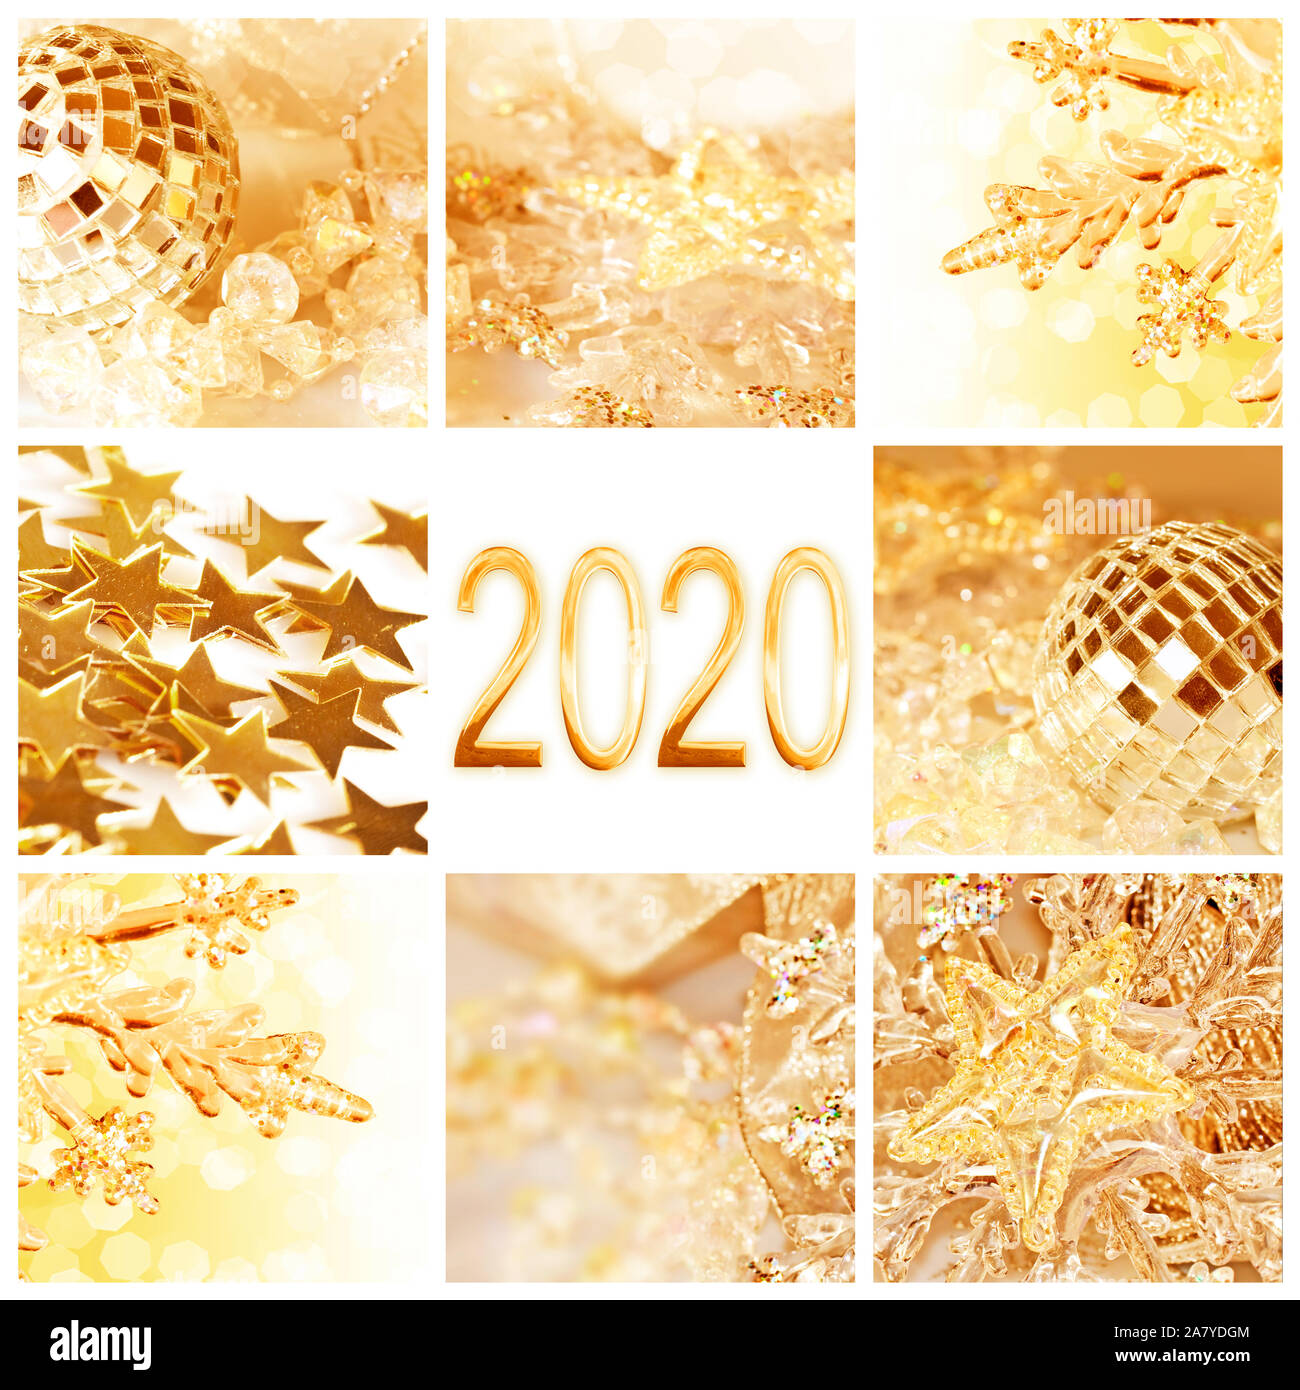 2020, golden christmas ornaments collage square new year and holiday greeting card Stock Photo